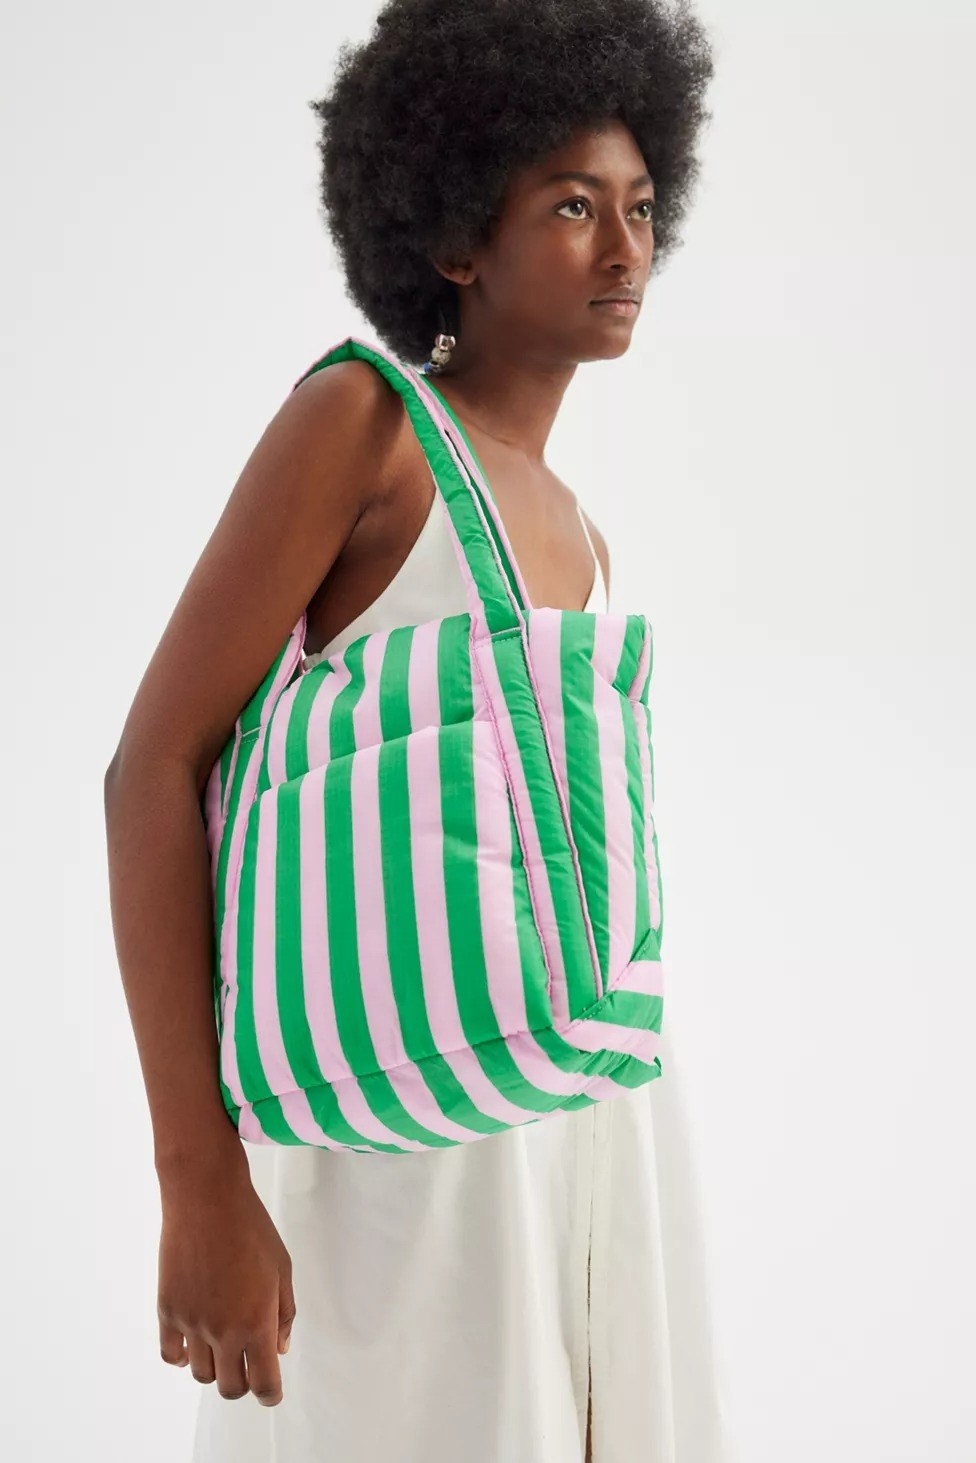 model carrying the tote in green and pink stripes